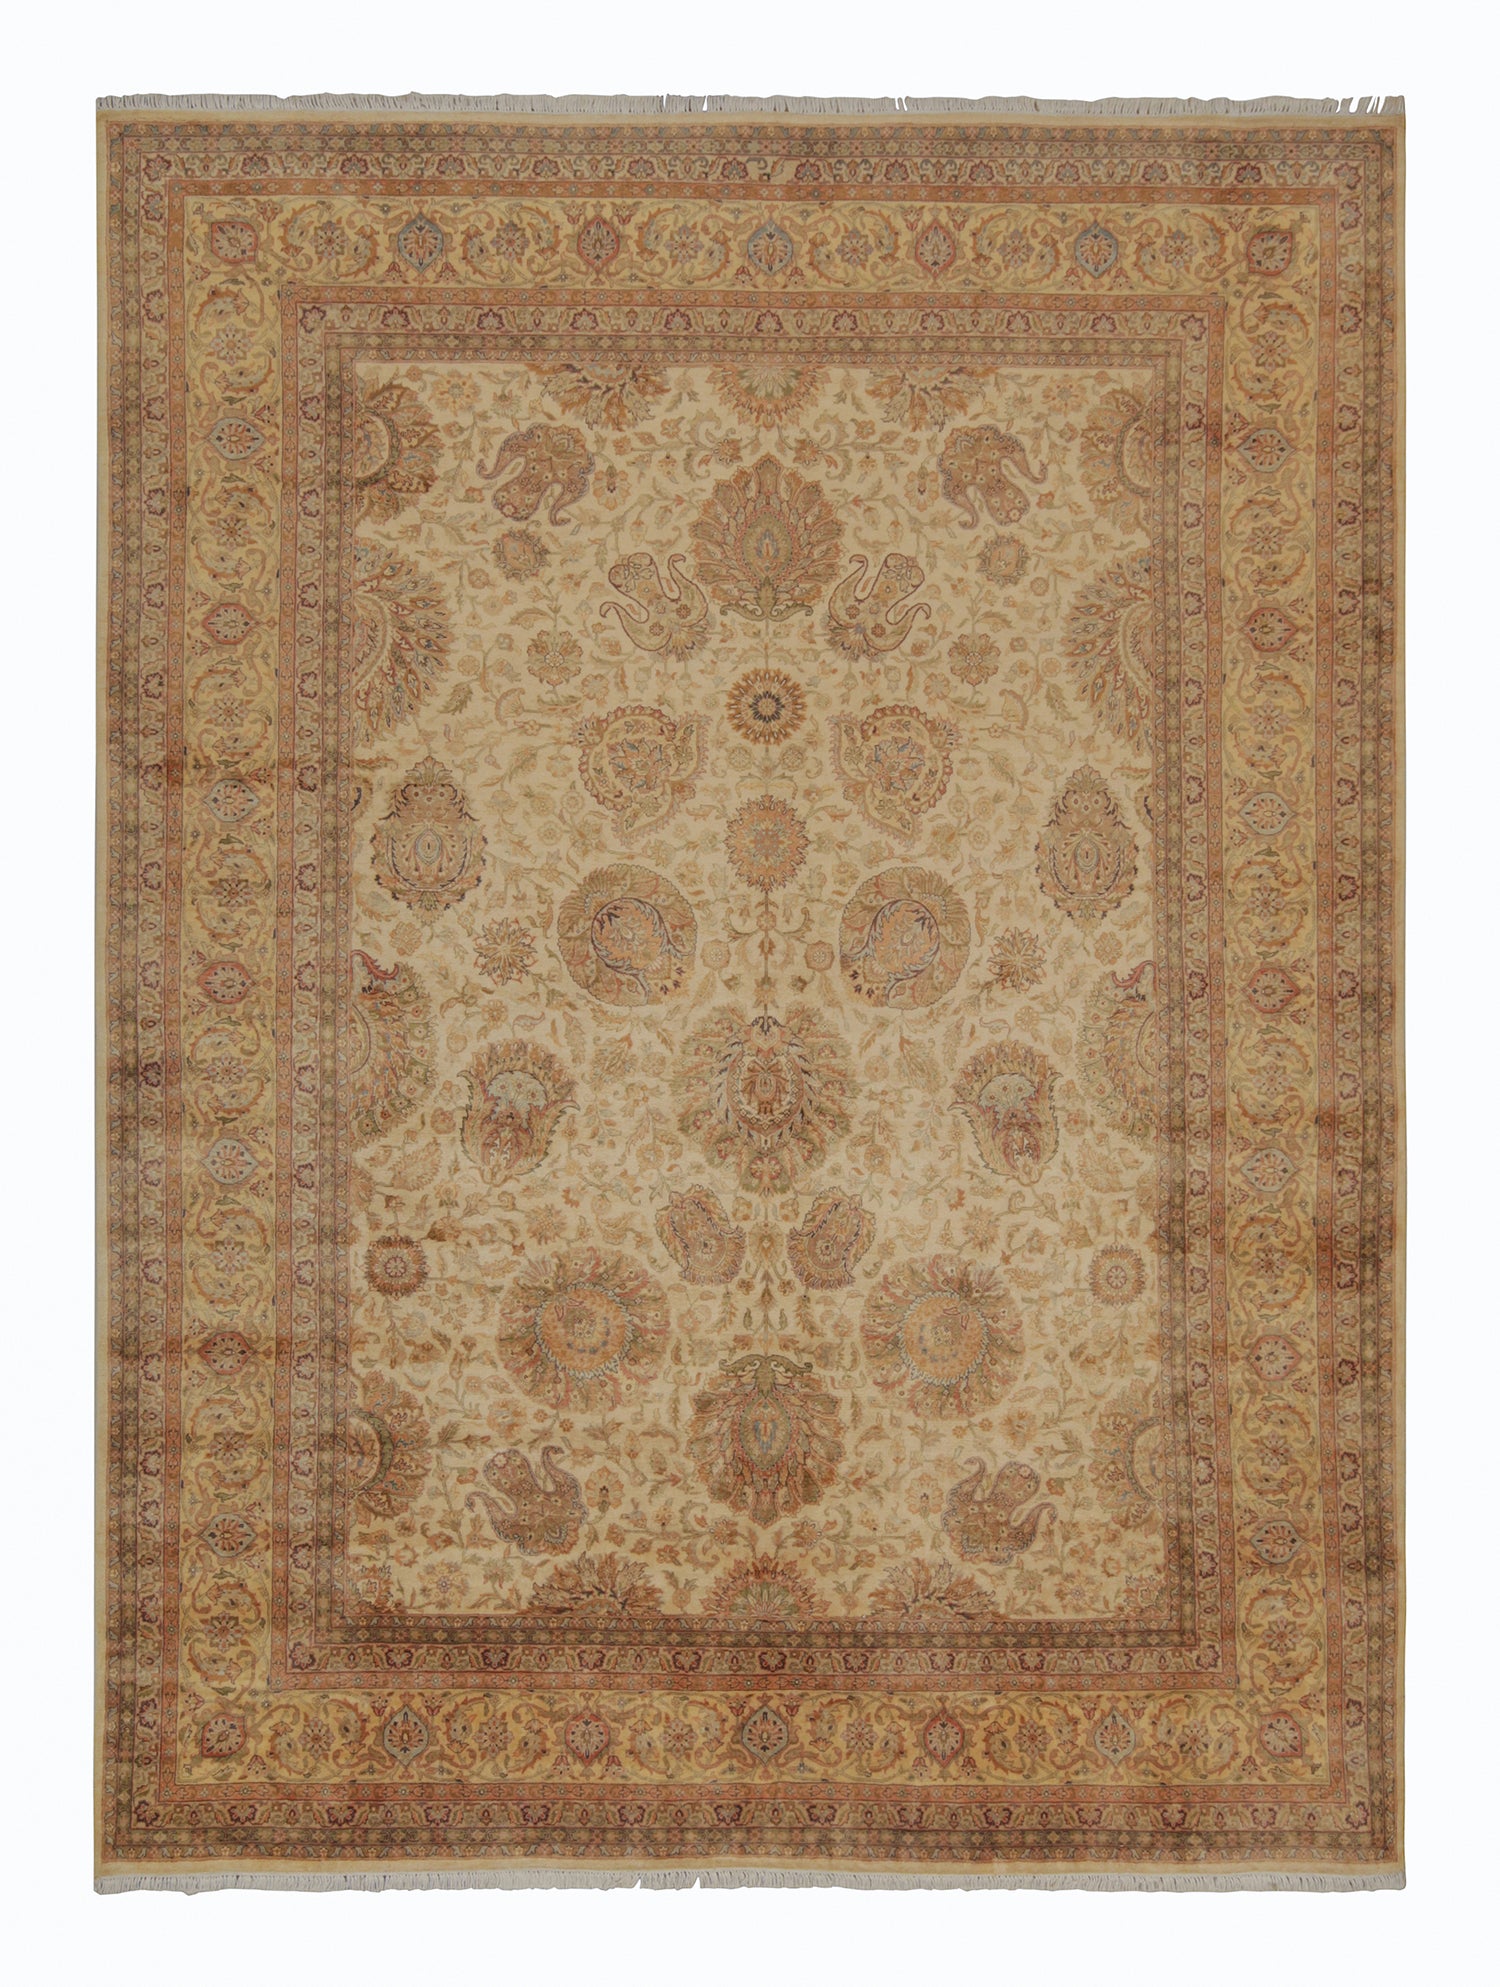 Rug & Kilim’s Persian Style Rug with Gold and Beige-Brown Floral Pattern